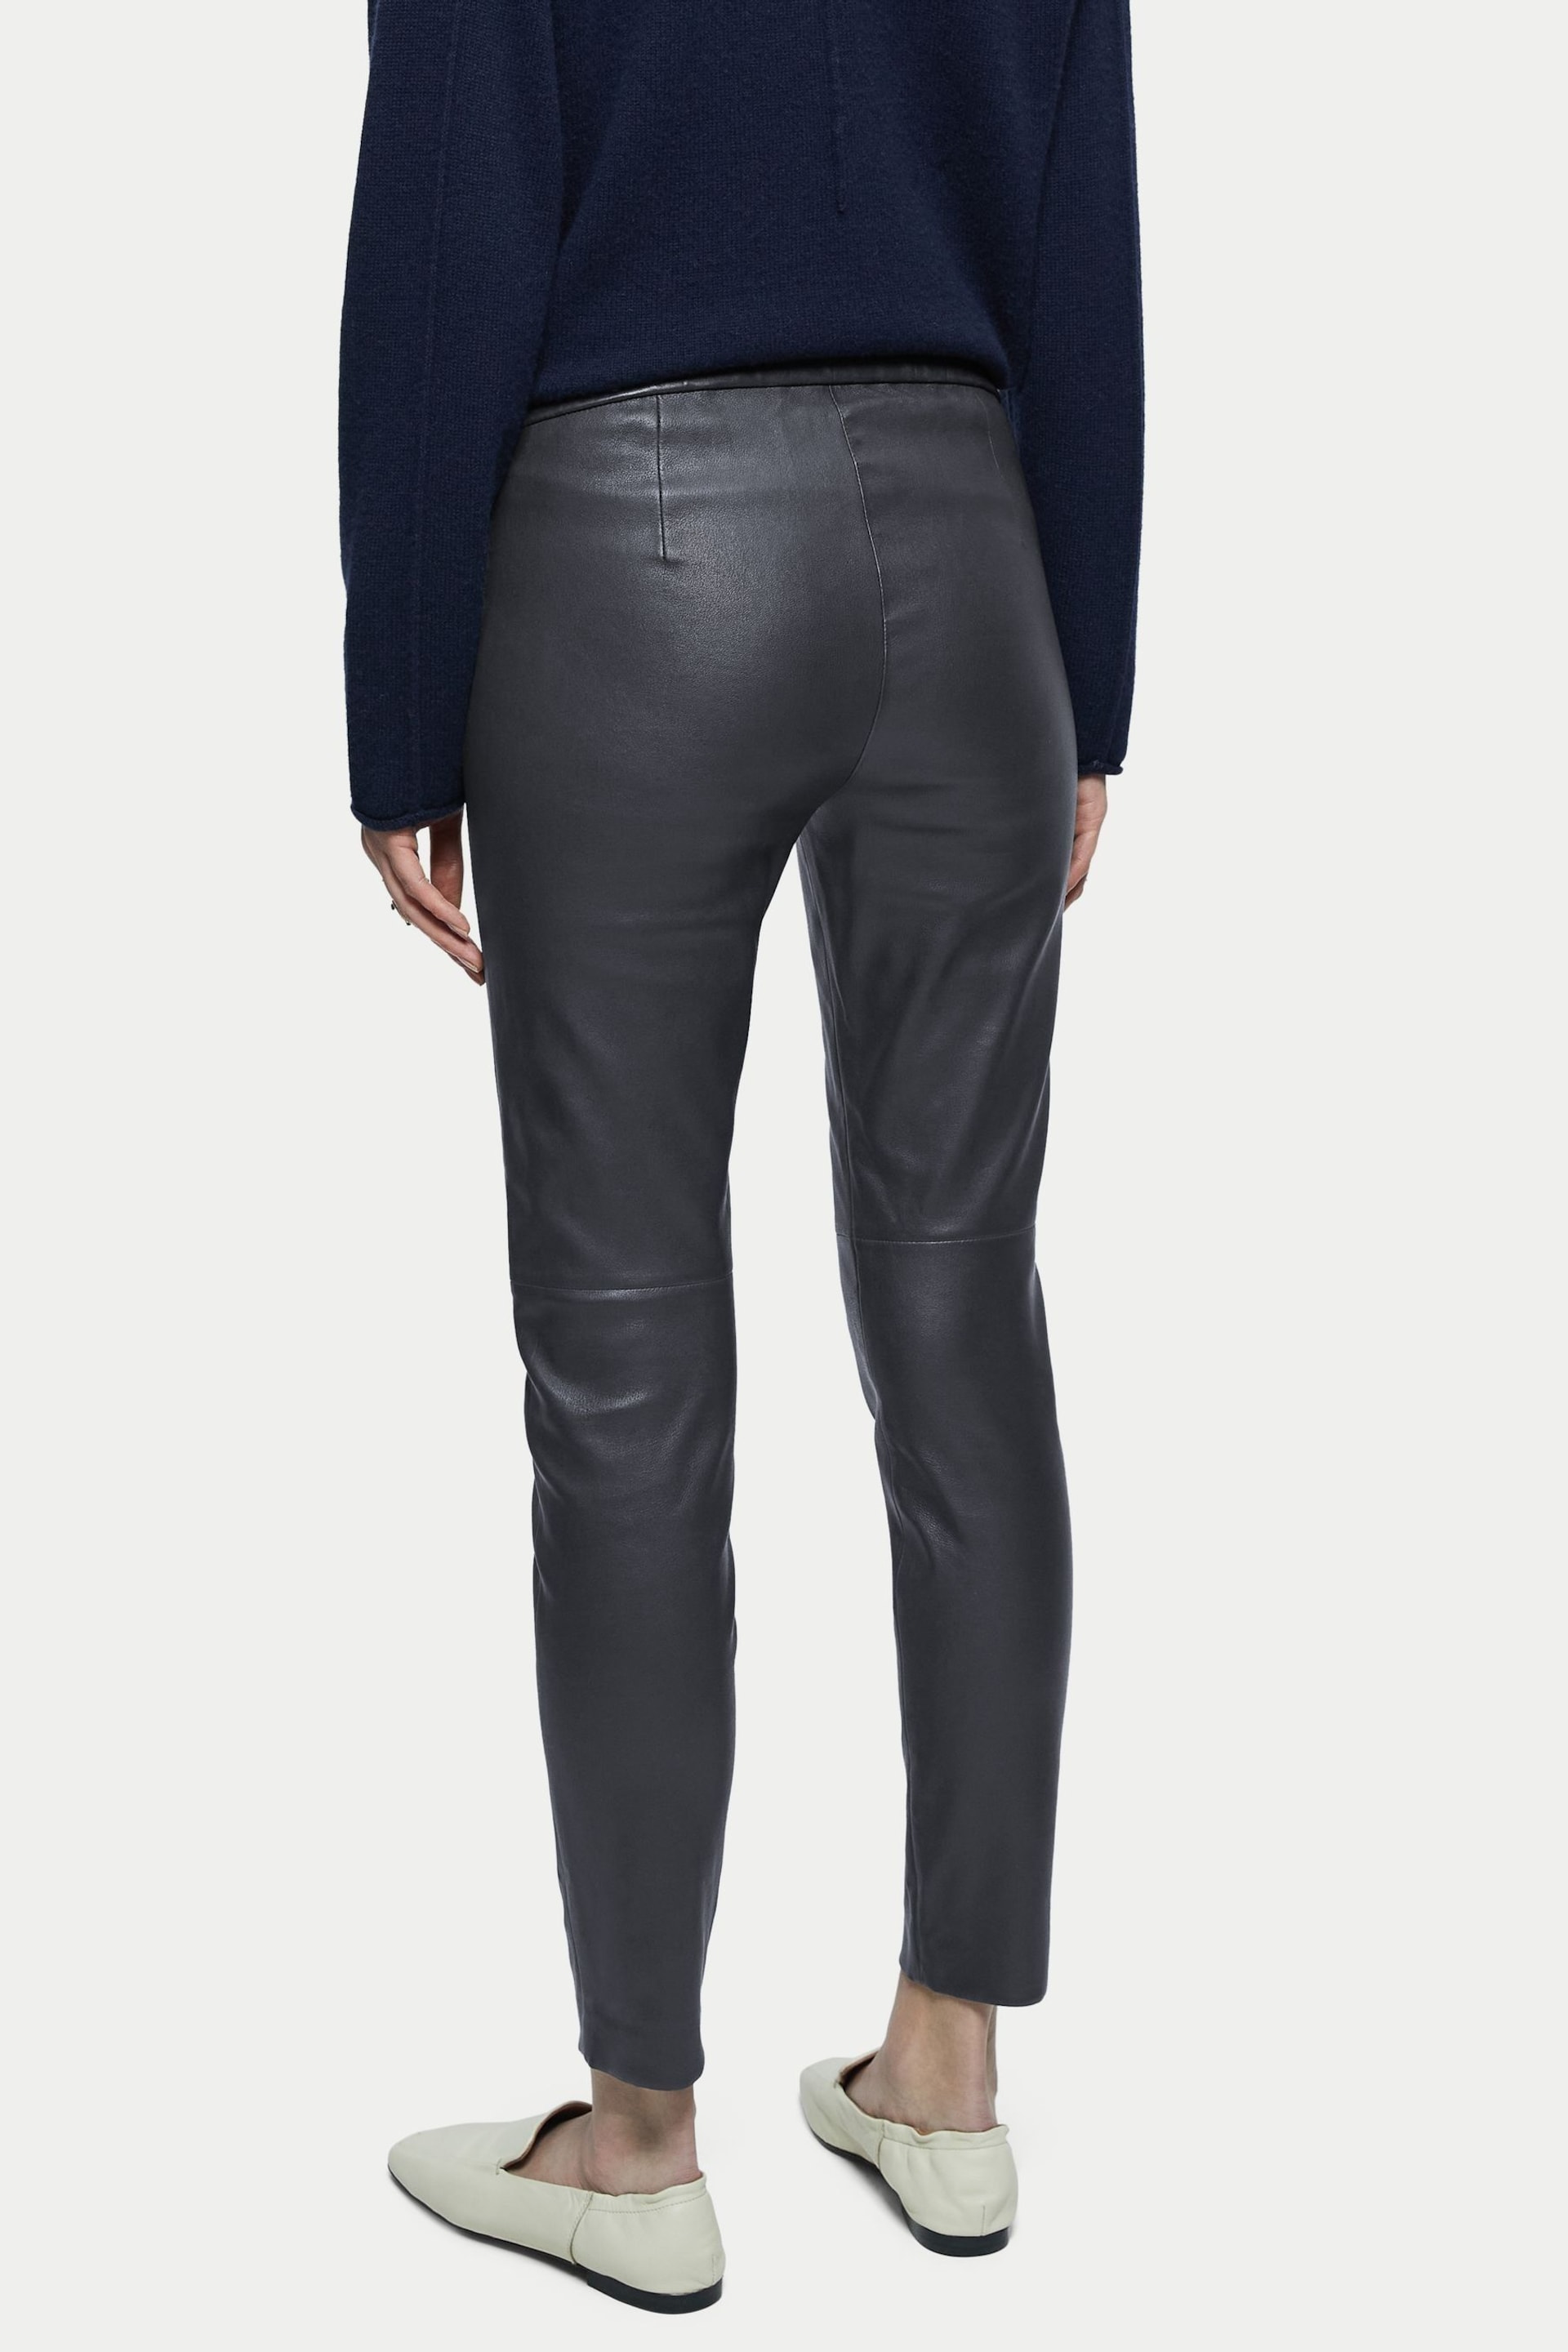 Jigsaw Blue Stretch Leather Leggings - Image 2 of 4